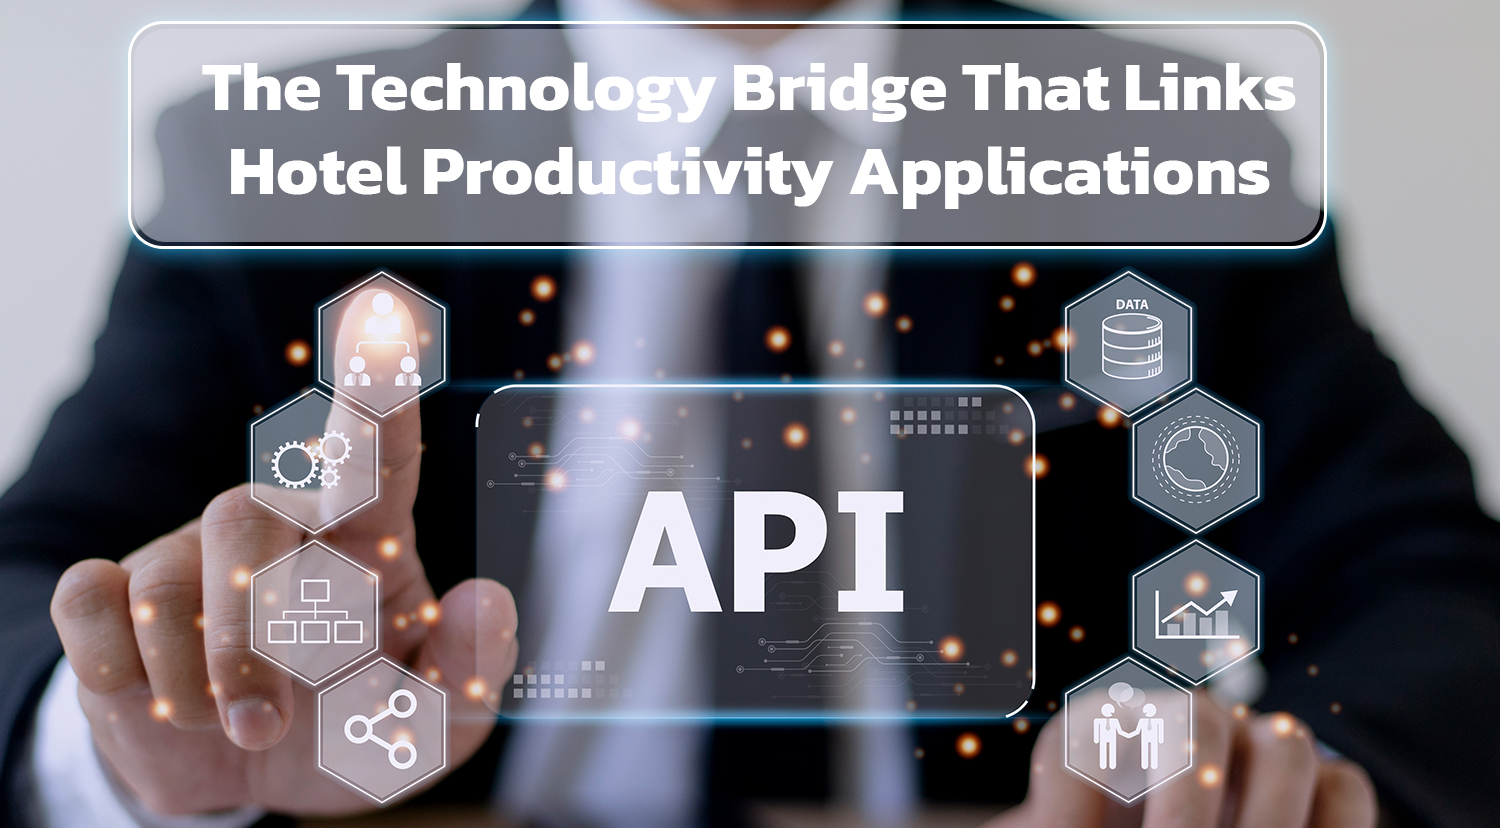 The Technology Bridge That Links Hotel Productivity Applications